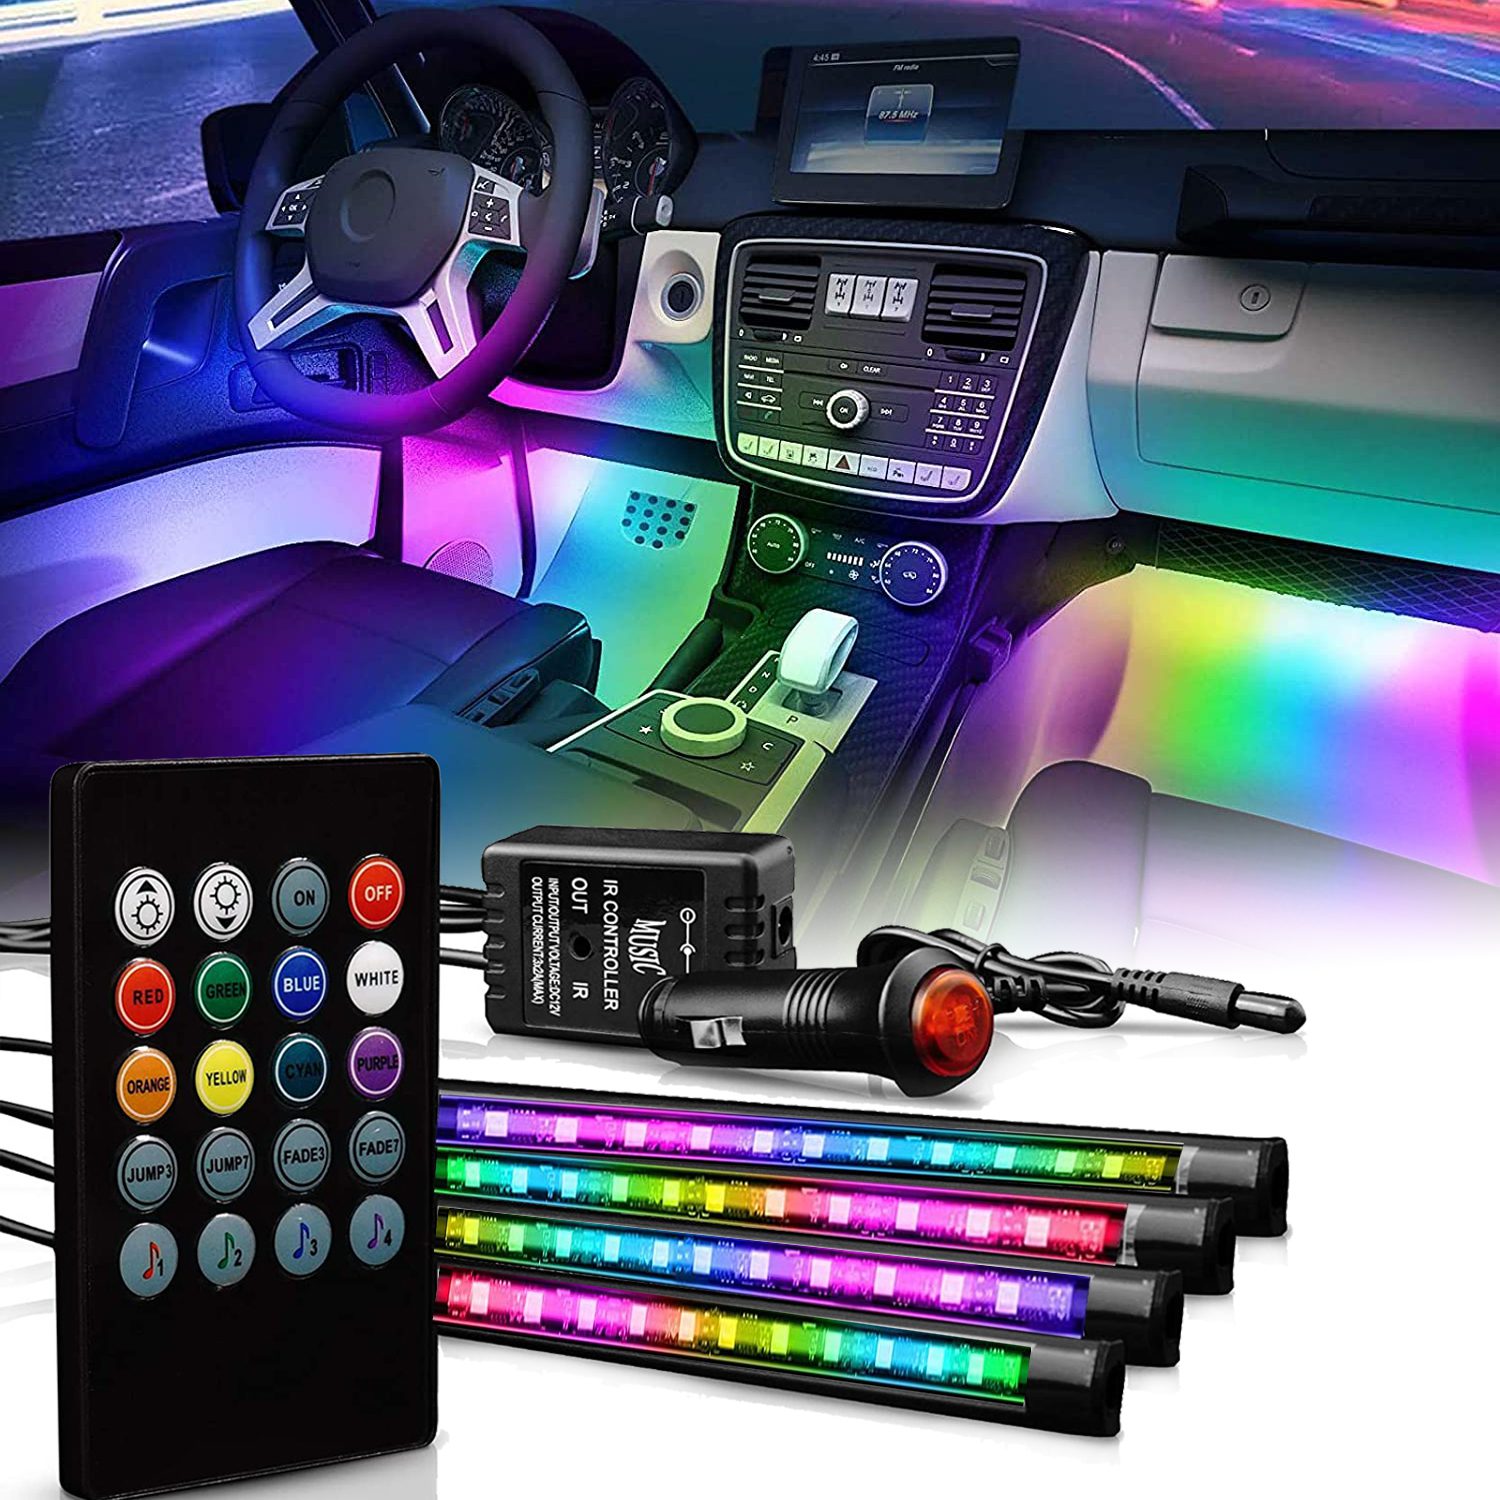 Merry Christmas Gift LED Interior Car Lights Bluetooth APP Controller Ajaol 4pcs 48 LED USB DC 5V Multicolor Music Car Interior Light LED Under Dash Lighting Kit for Auto with Sound Active Function 